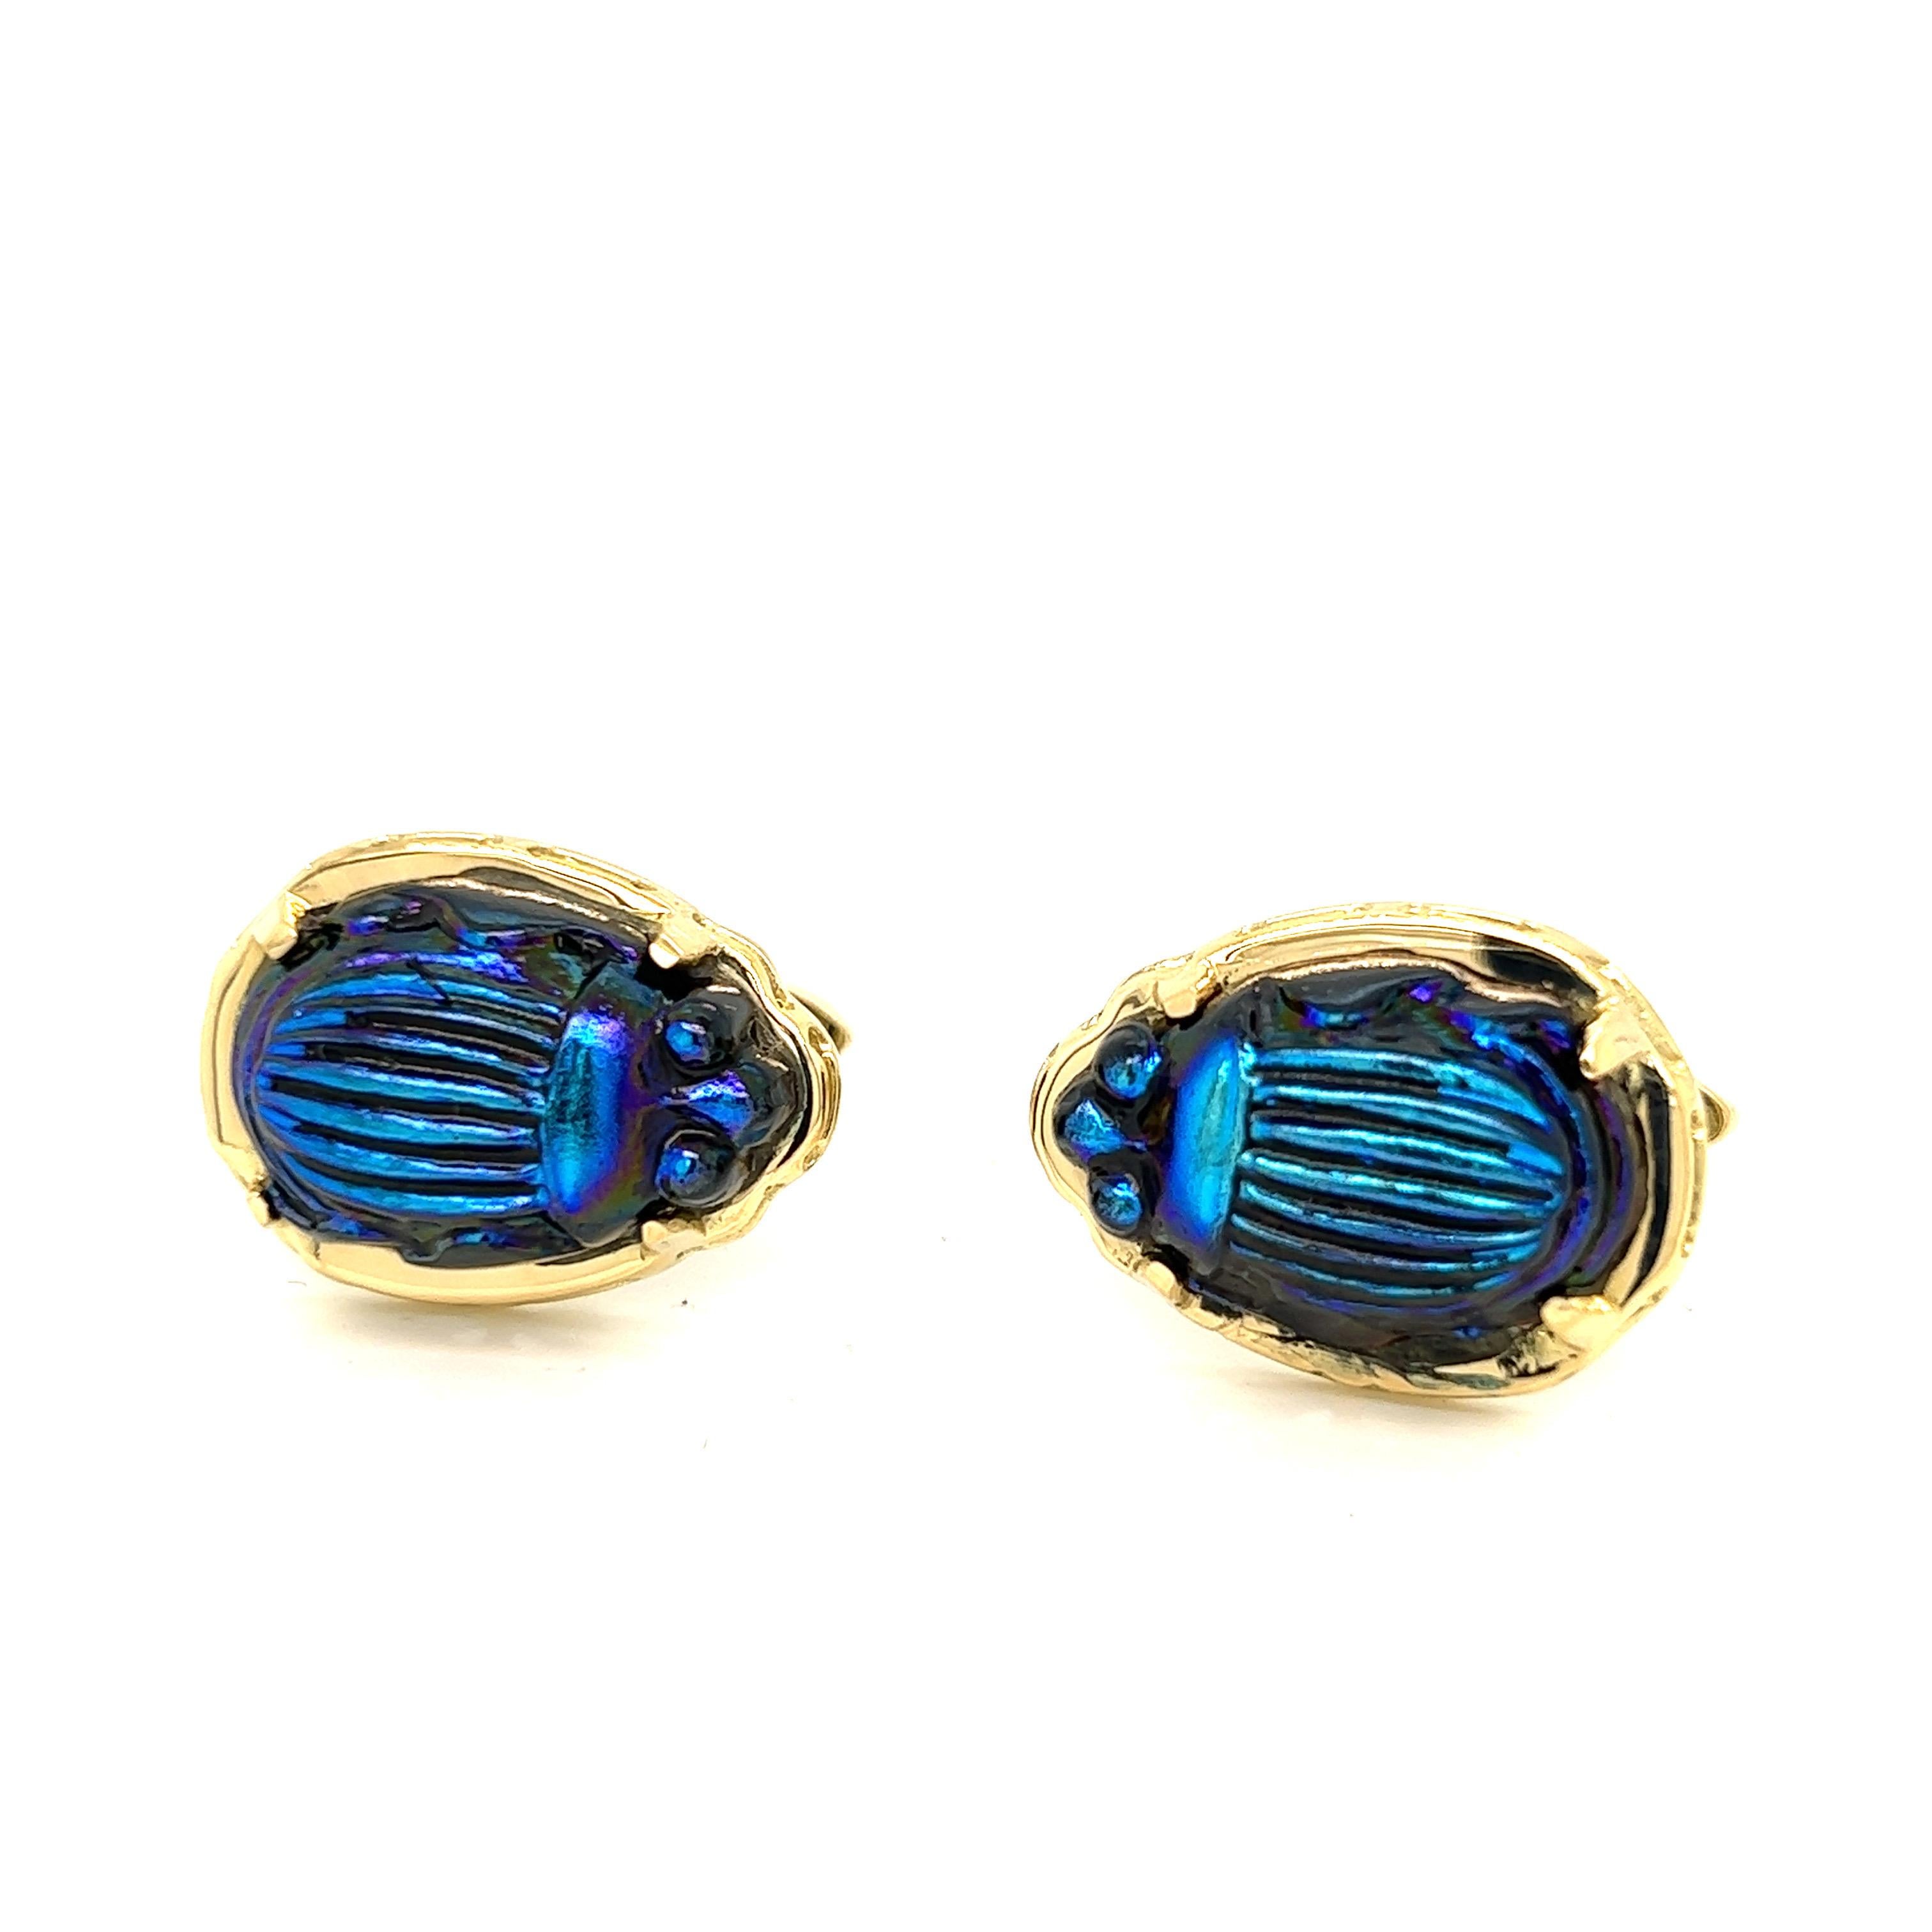 18k Yellow Gold Cufflinks with Vintage Tiffany Favrile Cobalt Blue Glass Scarabs.
Swivel backings.
Hand made in NYC.

Measurements: 22.2mm x 16.4mm